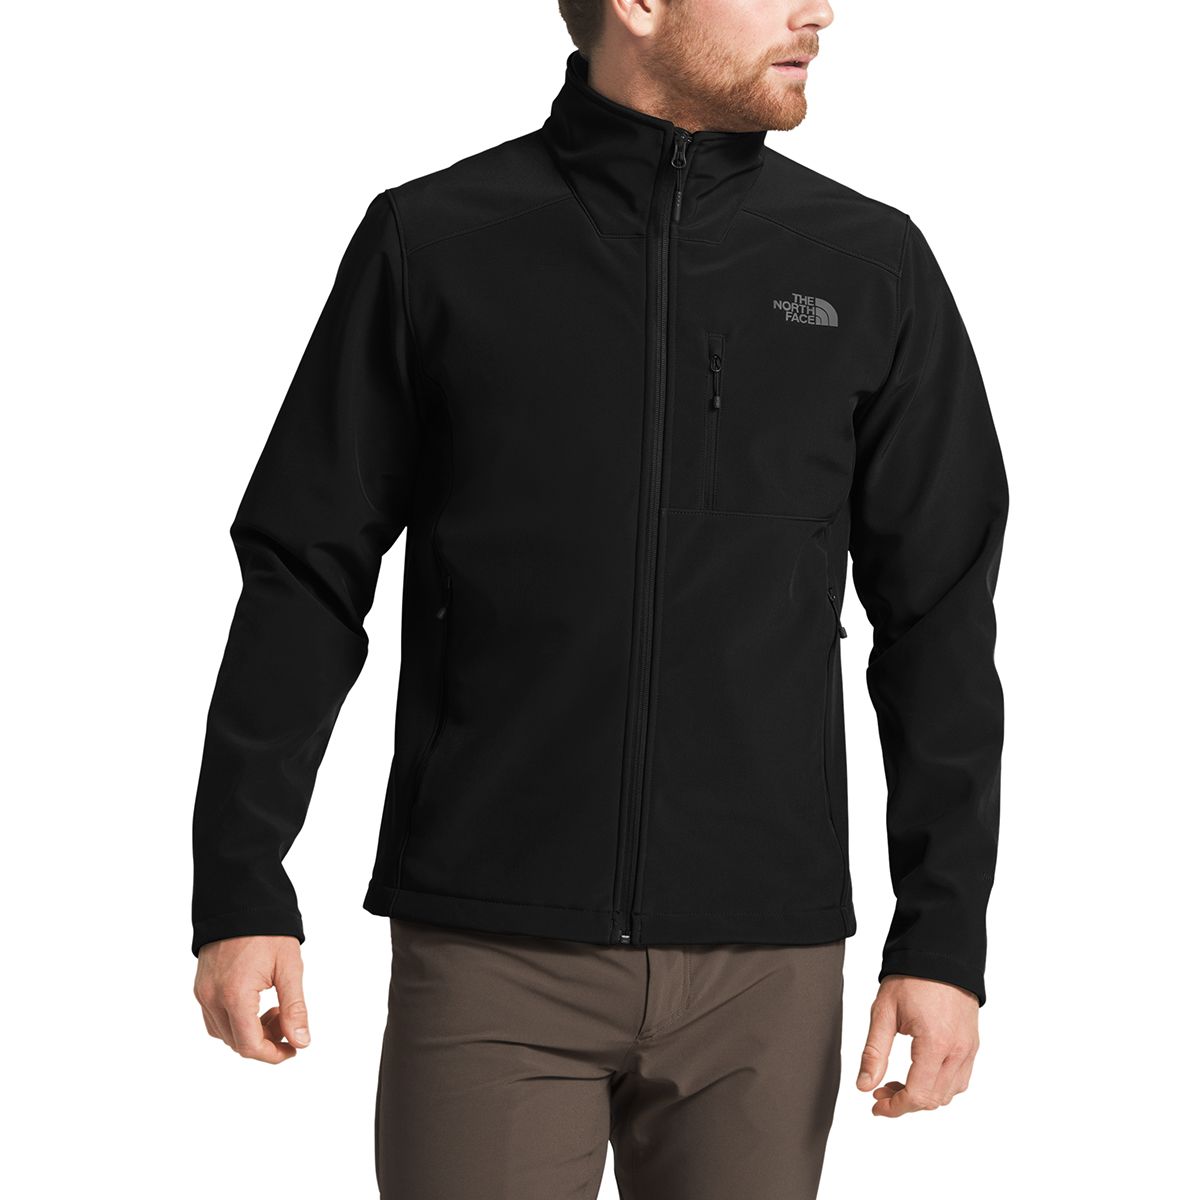 The North Face Apex Bionic 2 Softshell Jacket - Men's | Backcountry.com